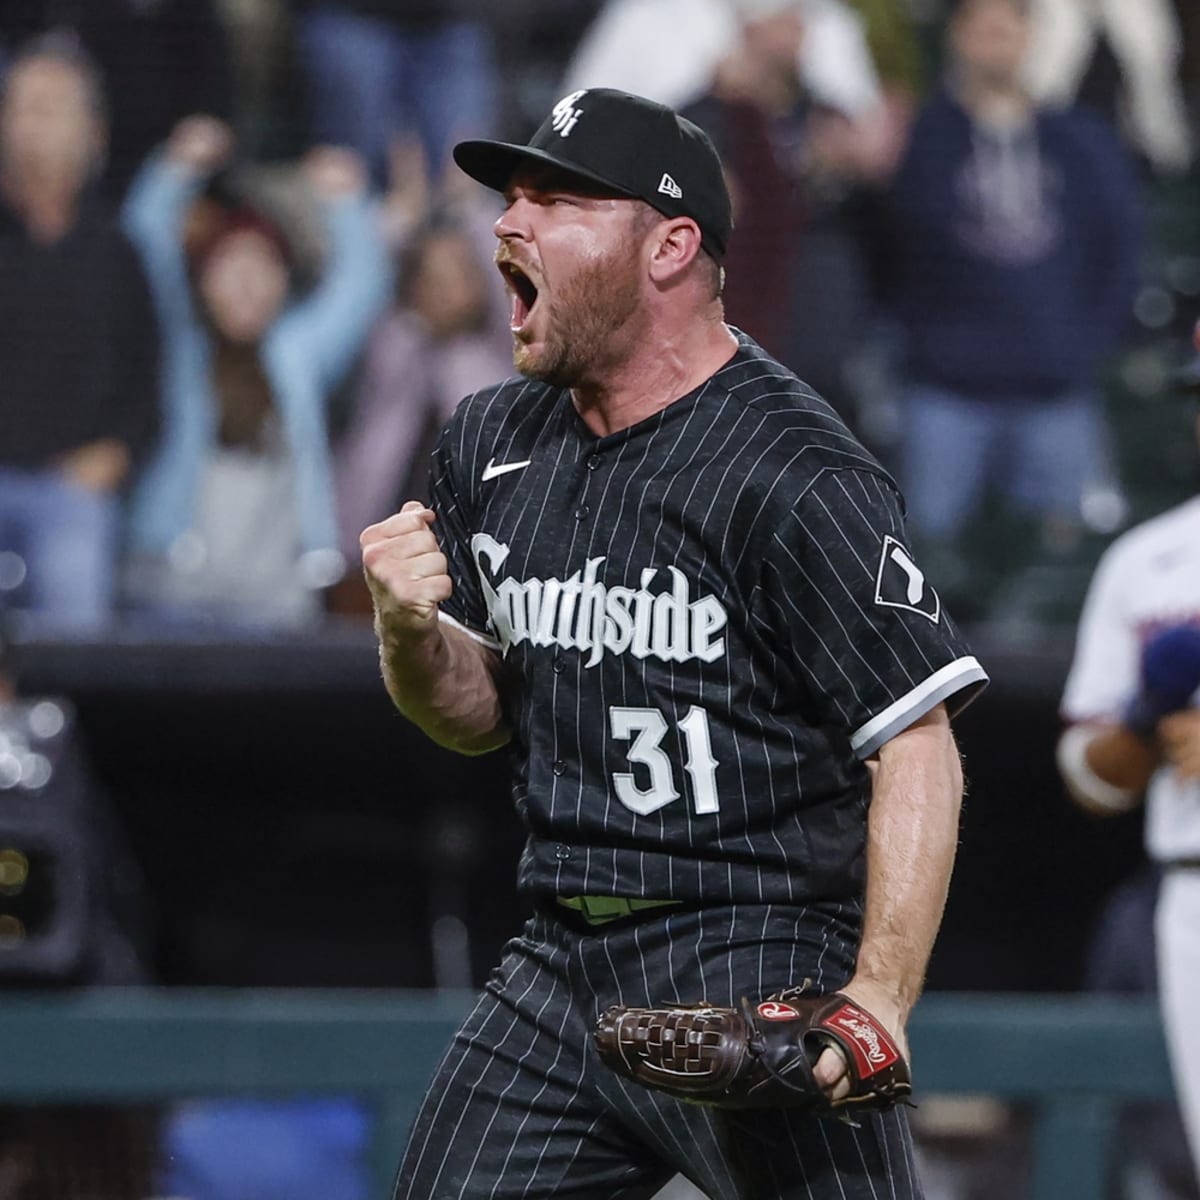 Chicago White Sox 2022 Schedule Is Out! - South Side Sox